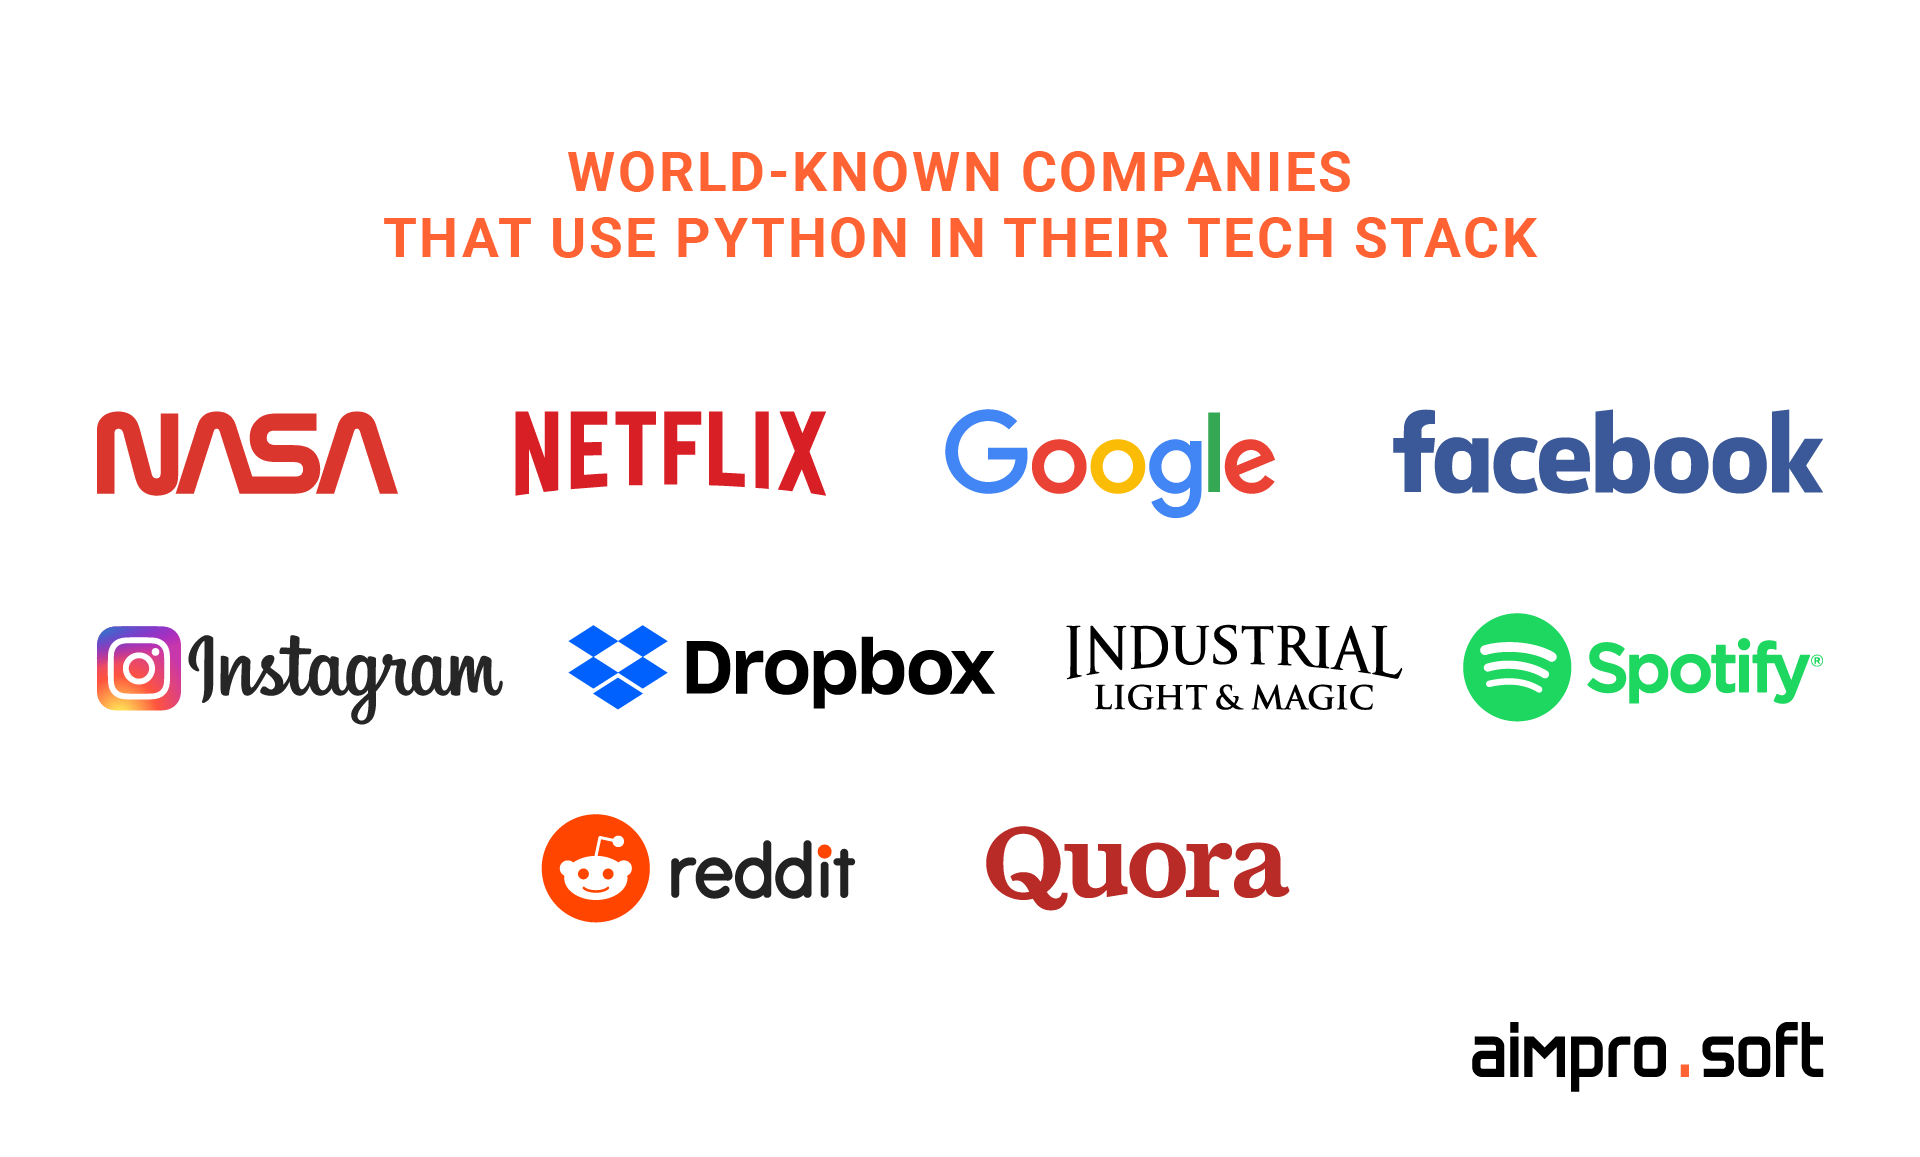 World-known companies that use Python in their tech stack